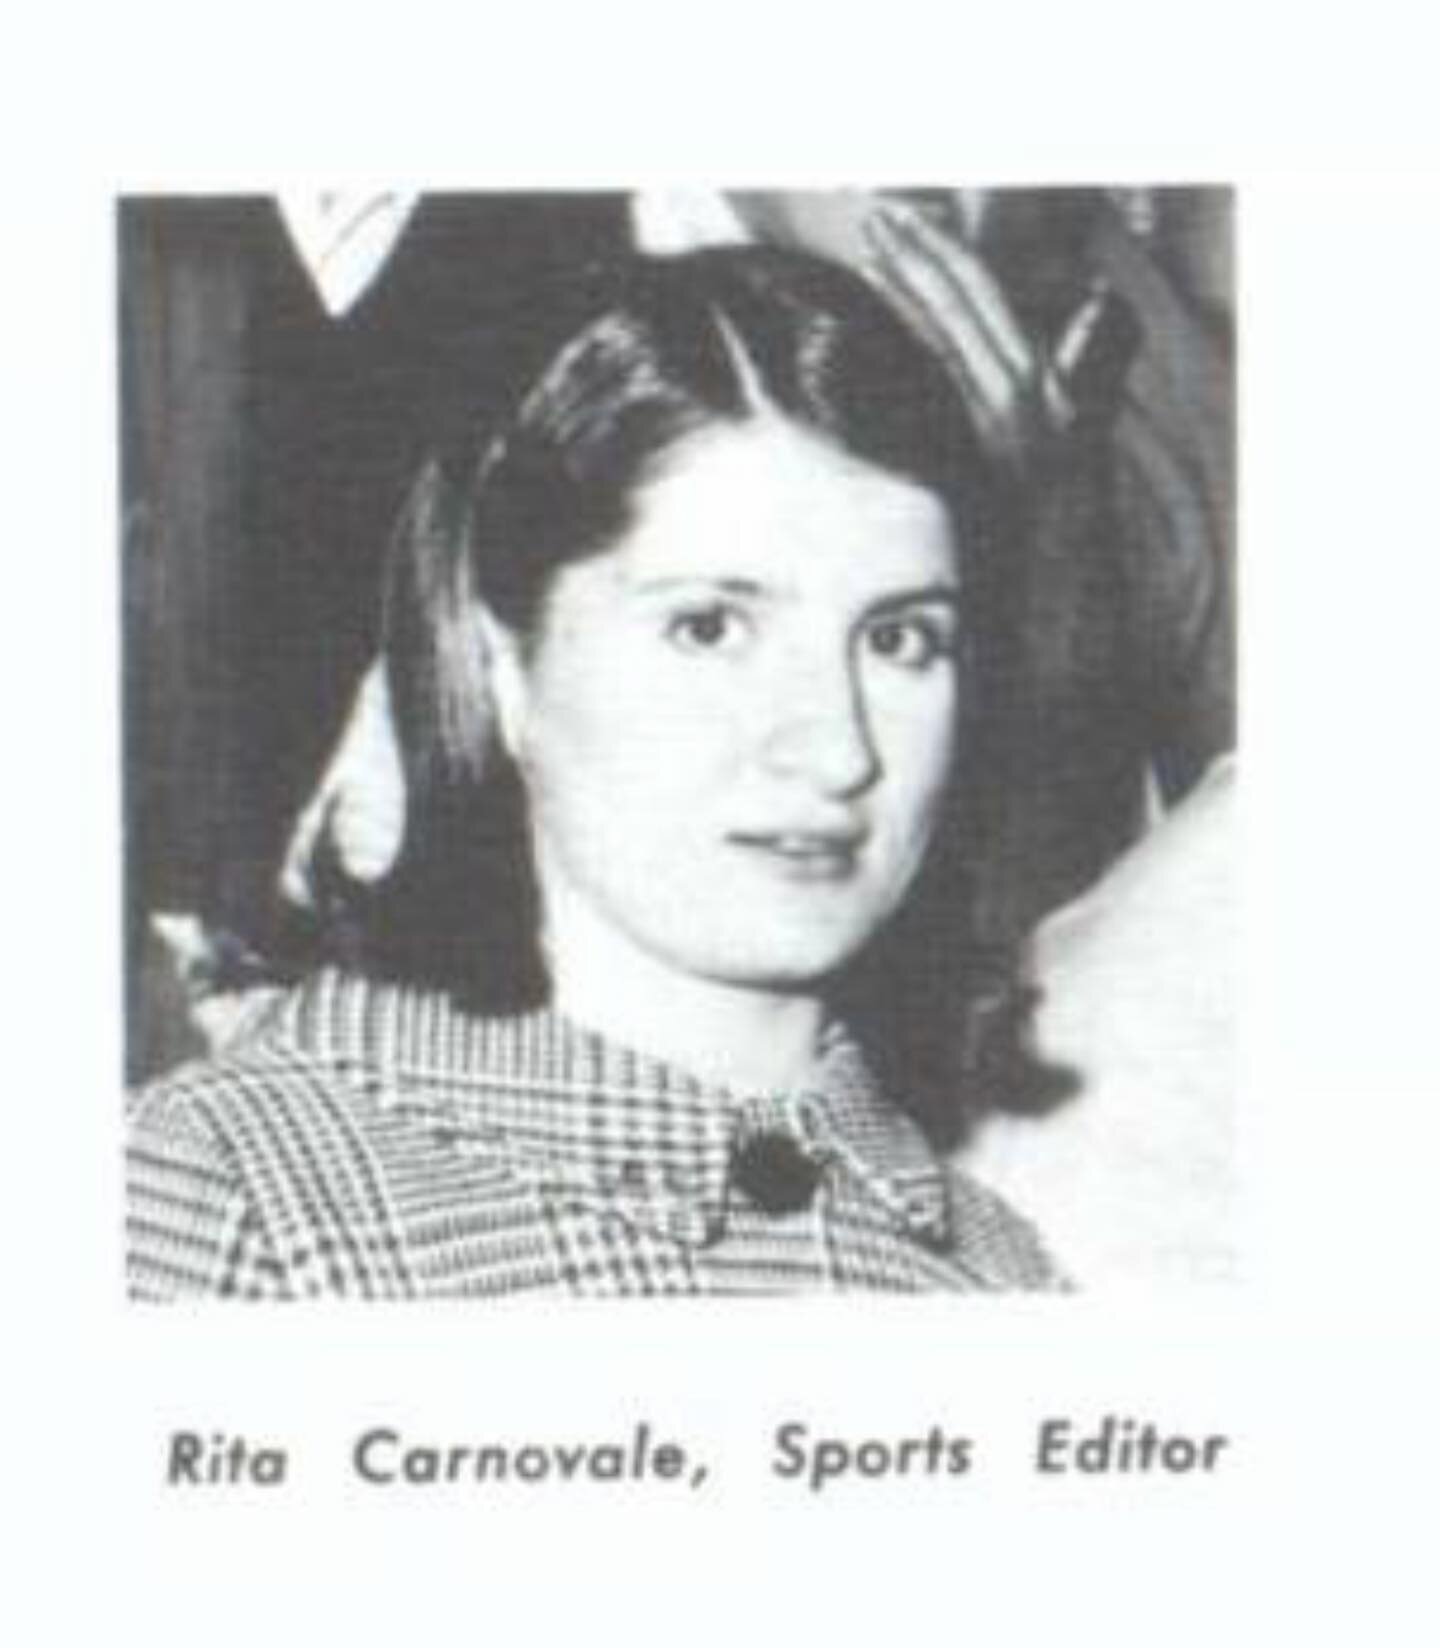 My mother and @disney CEO Bob Iger were co-sports editors of the 1969 Spindrift, the Oceanside High School yearbook (also my HS). Two titans. And this Britt guy I don&rsquo;t know who that is. Or why my mother didn&rsquo;t want to hang off the fence 